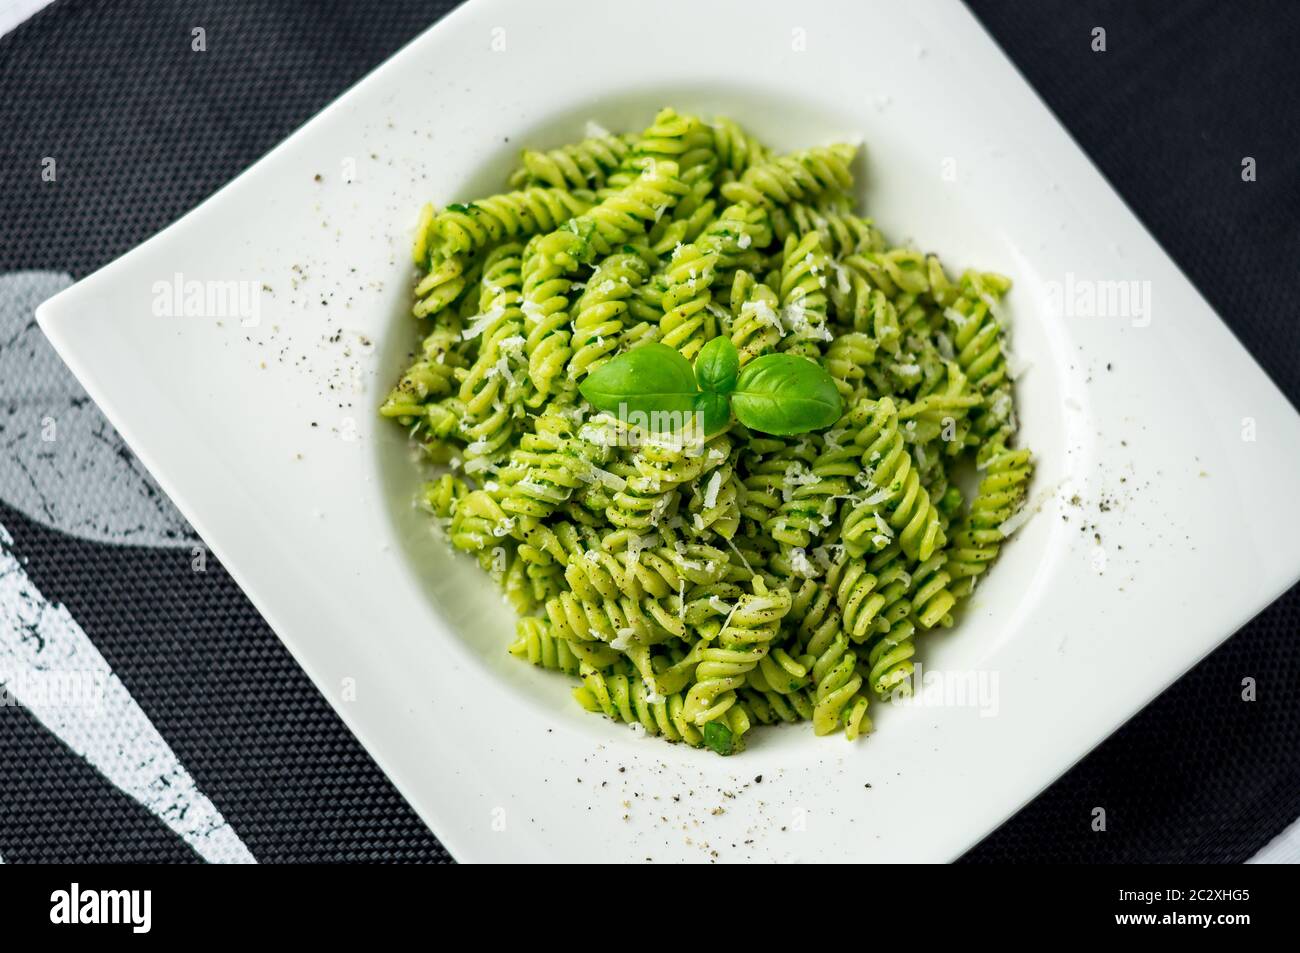 Rotini pesto pasta top view. Rotini pasta with basil pesto sauce, grated parmesan cheese and fresh pepper. This Italian dish makes a delicious meal. Stock Photo